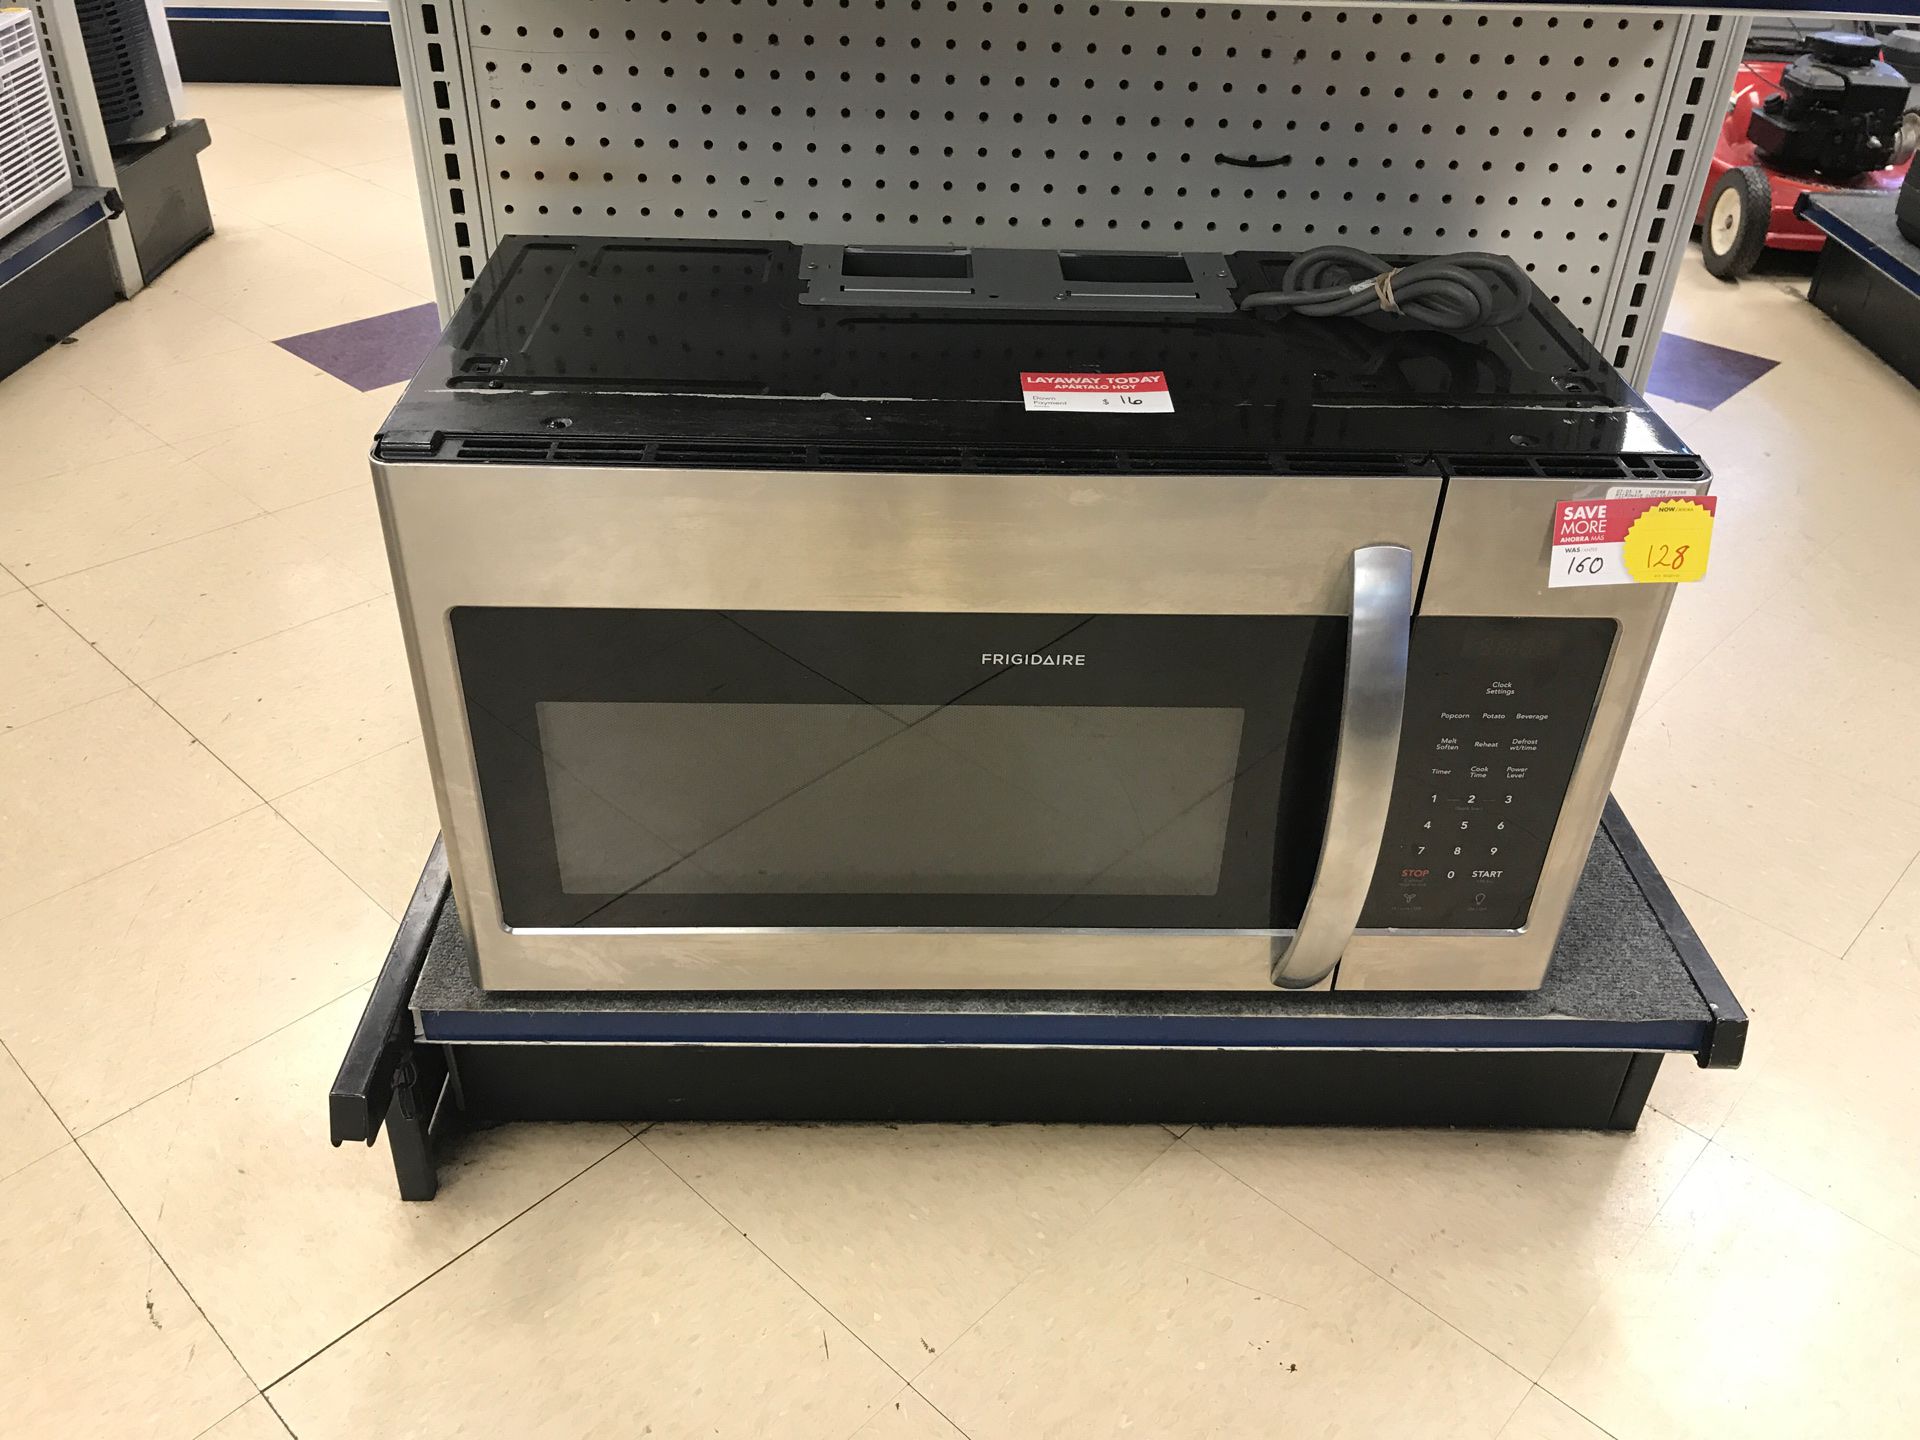 Frigidaire stainless steel microwave